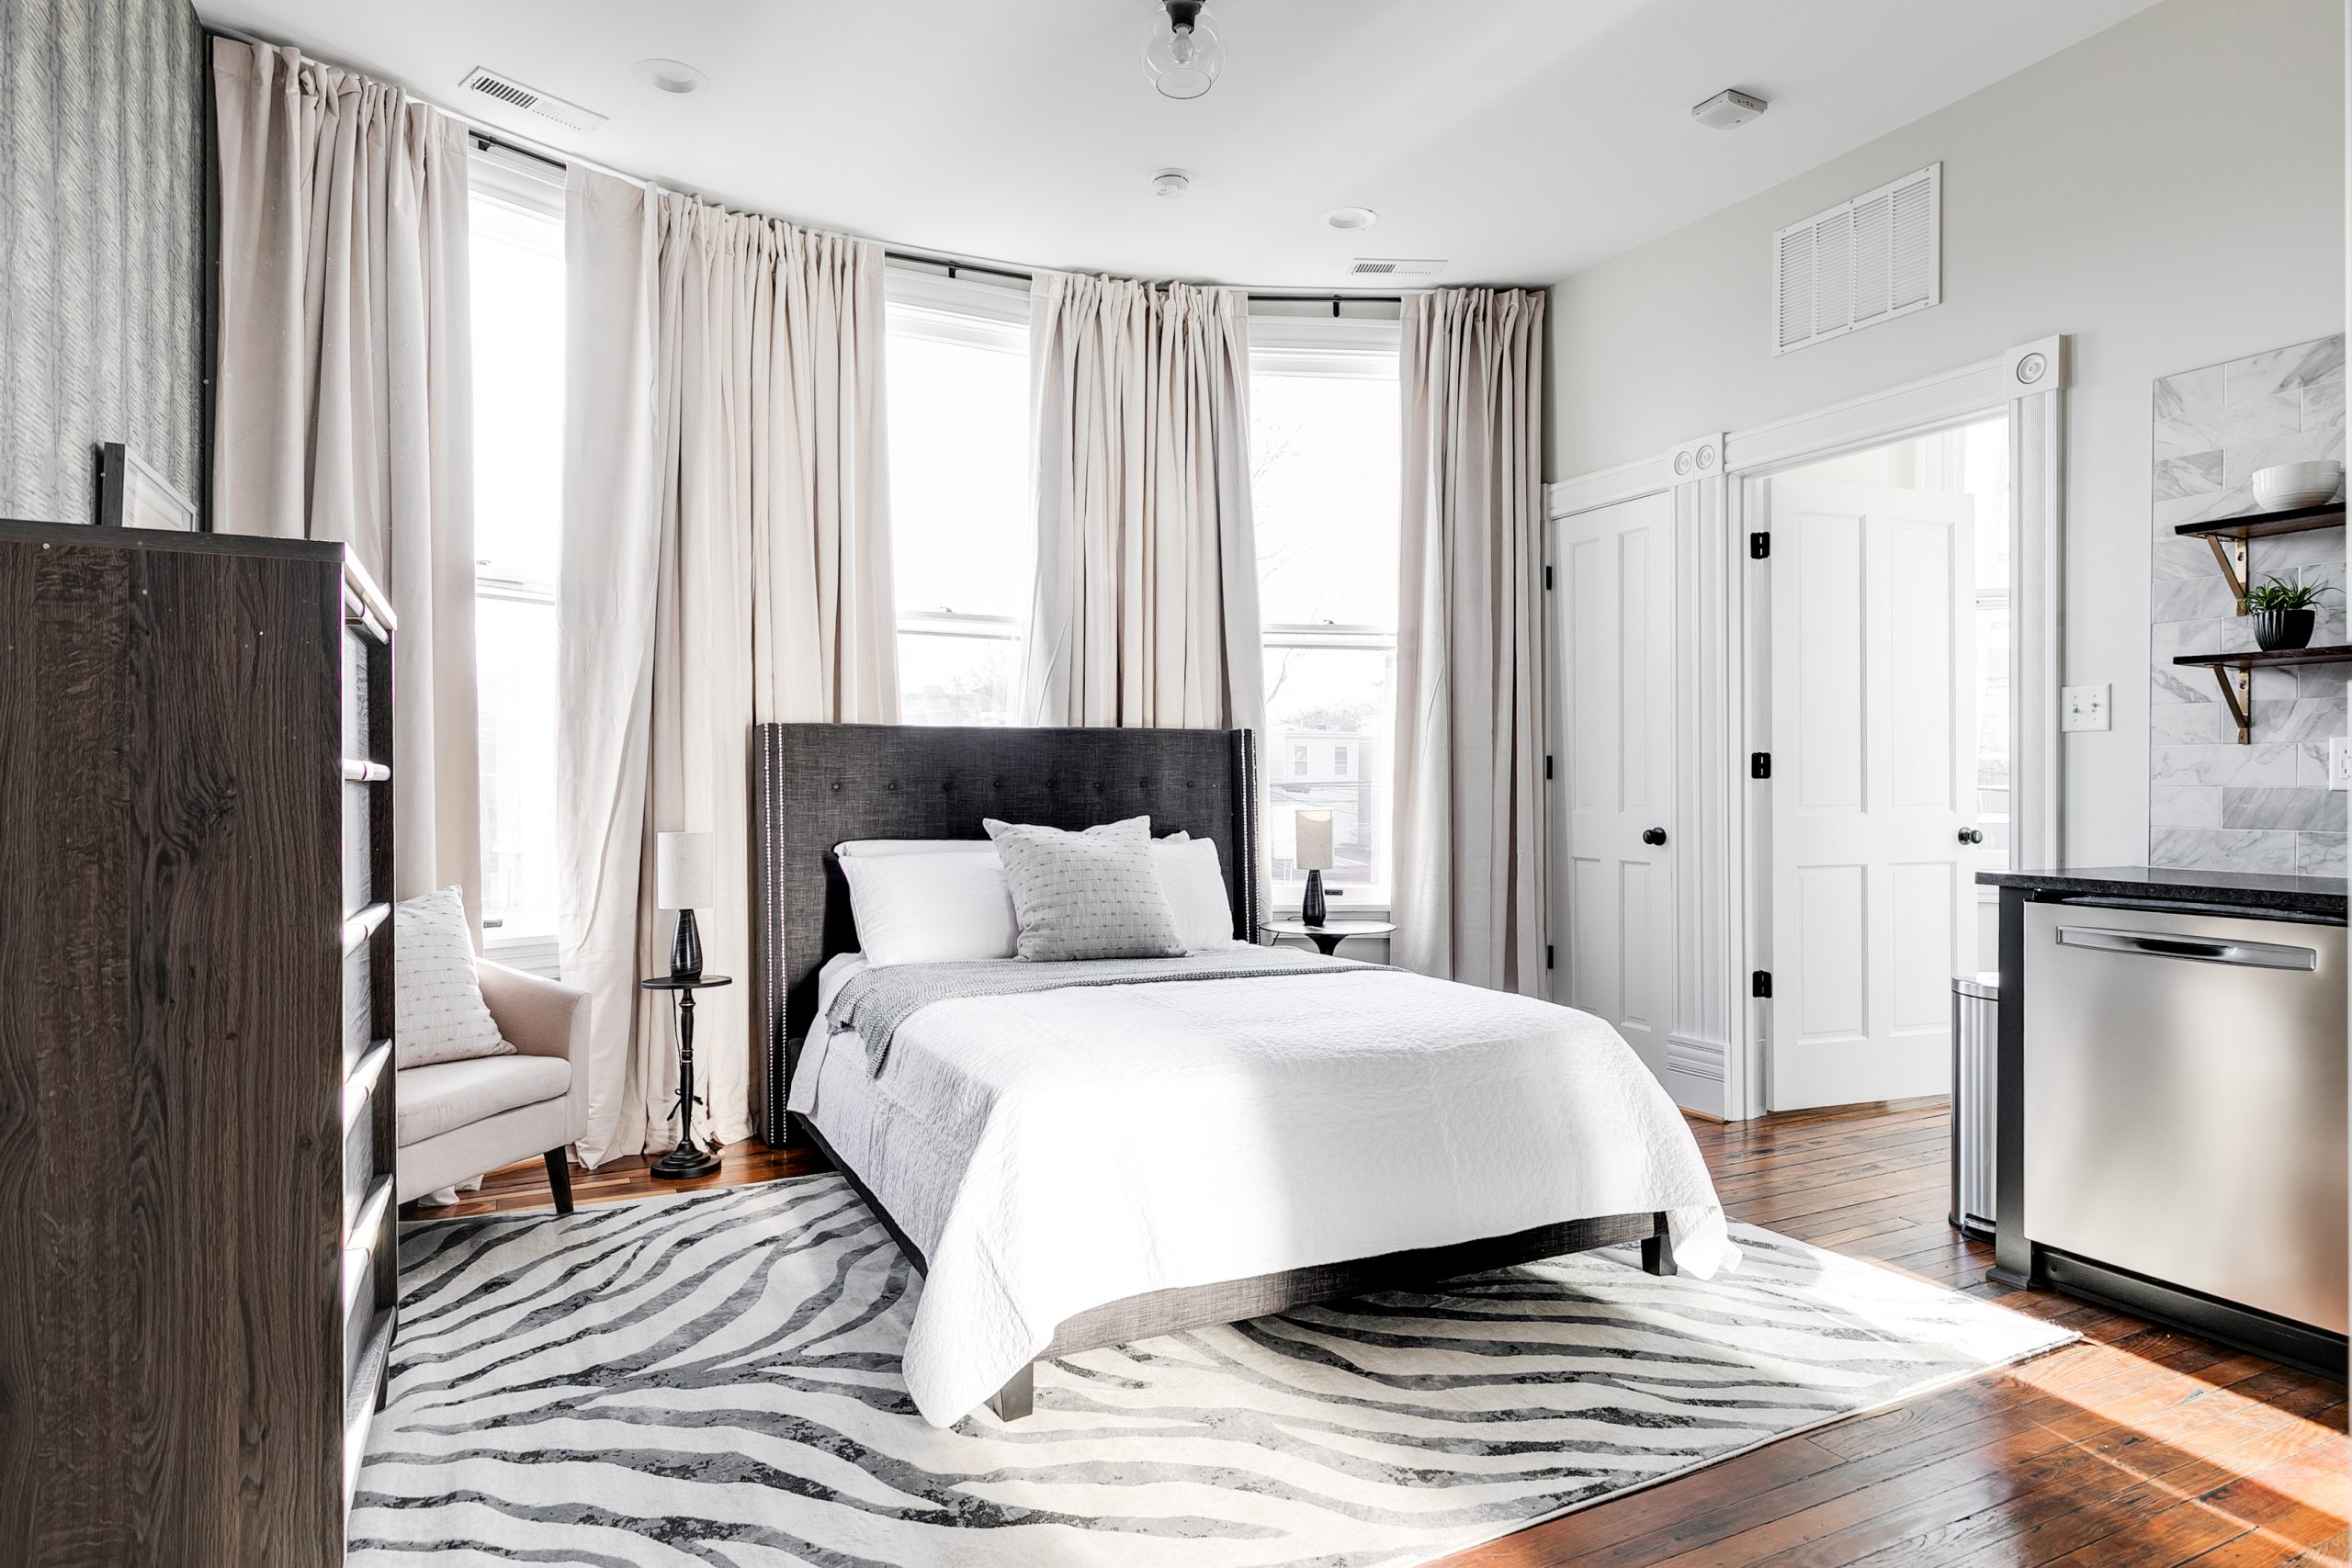 A modern white/cream bedroom with large bay windows and grey accents throughout.